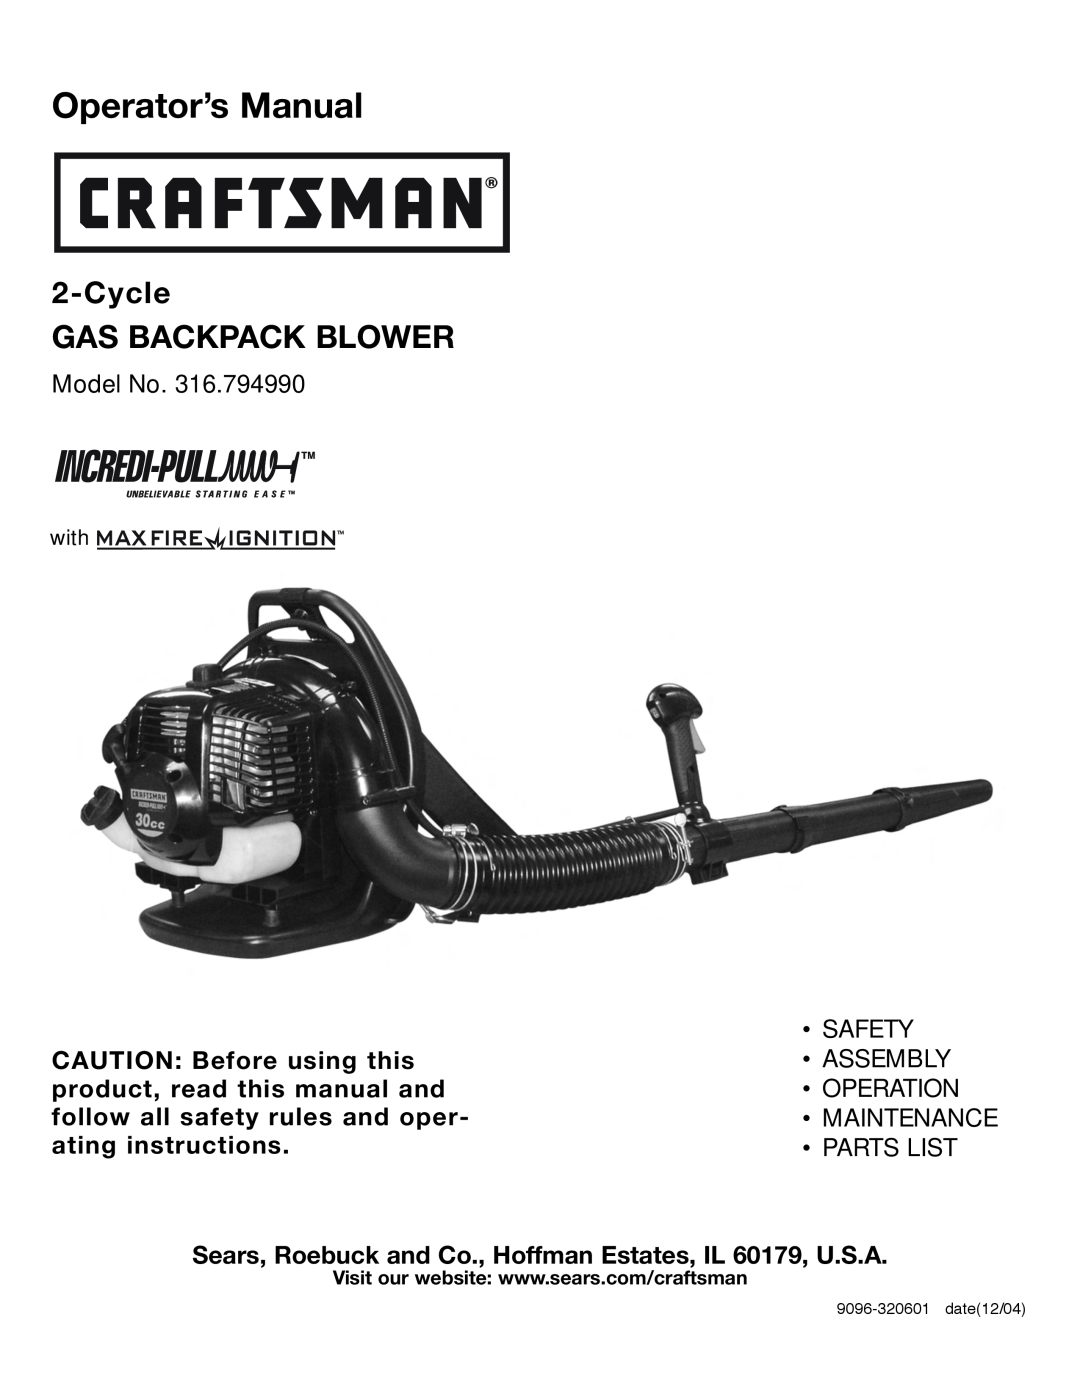 Craftsman 316.79499 manual Operator’s Manual, Gas Backpack Blower, Cycle, Model No, date12/04 